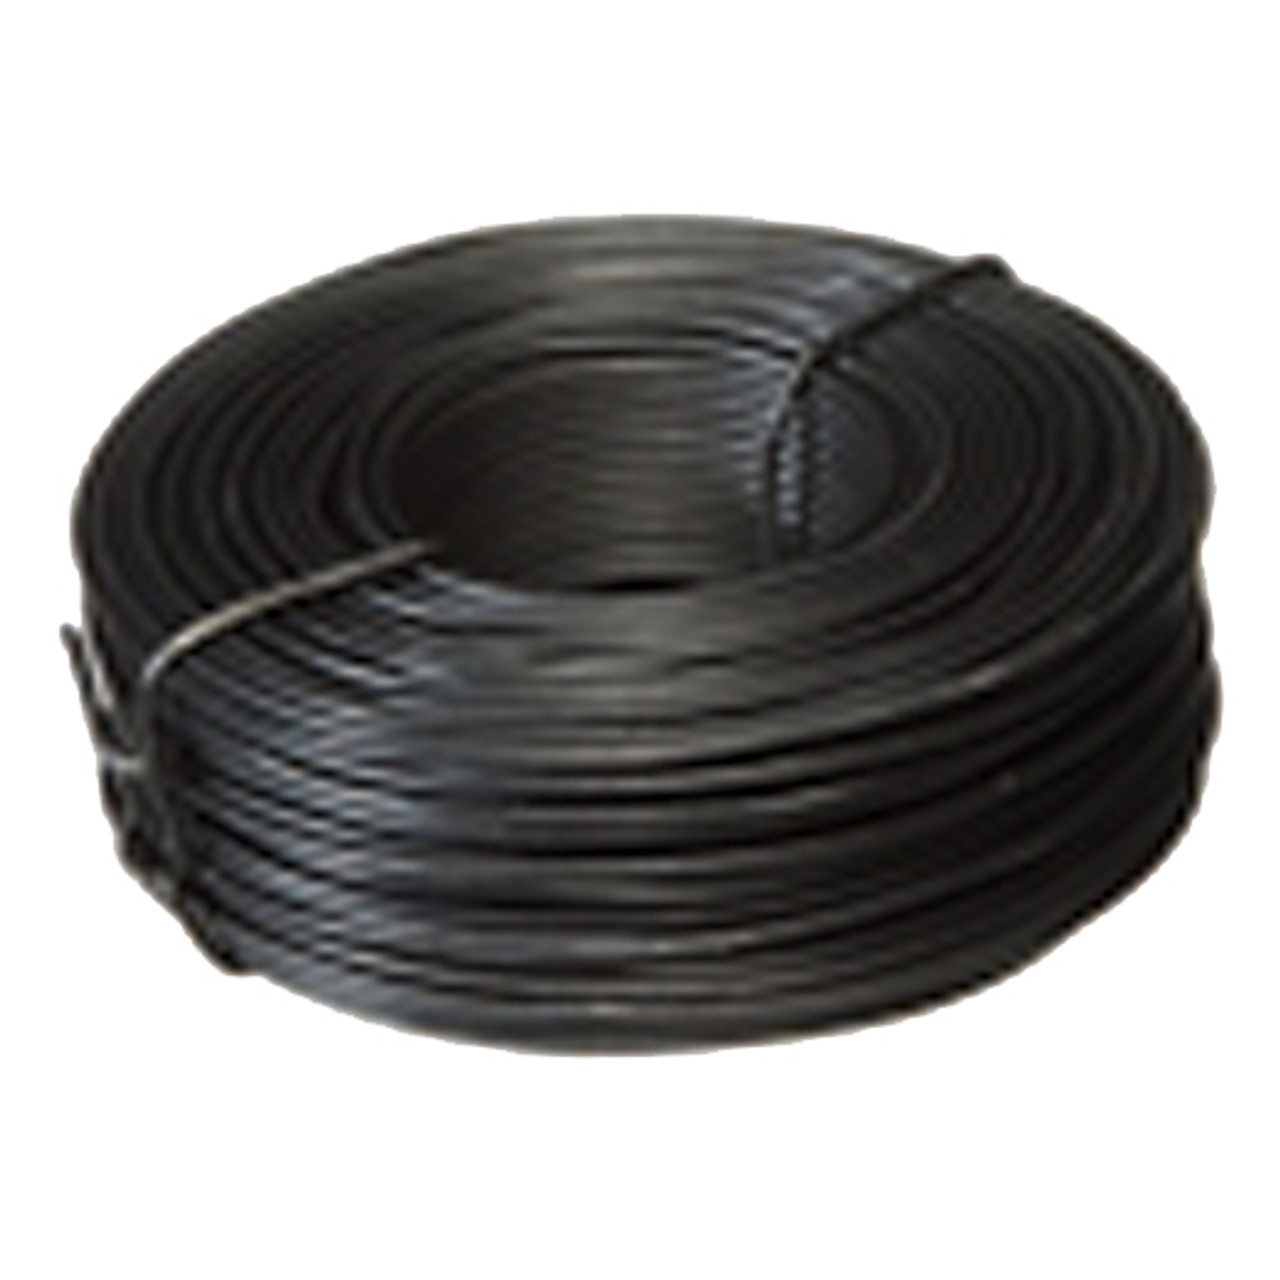 16 Gauge Trappers Tie Wire - Light